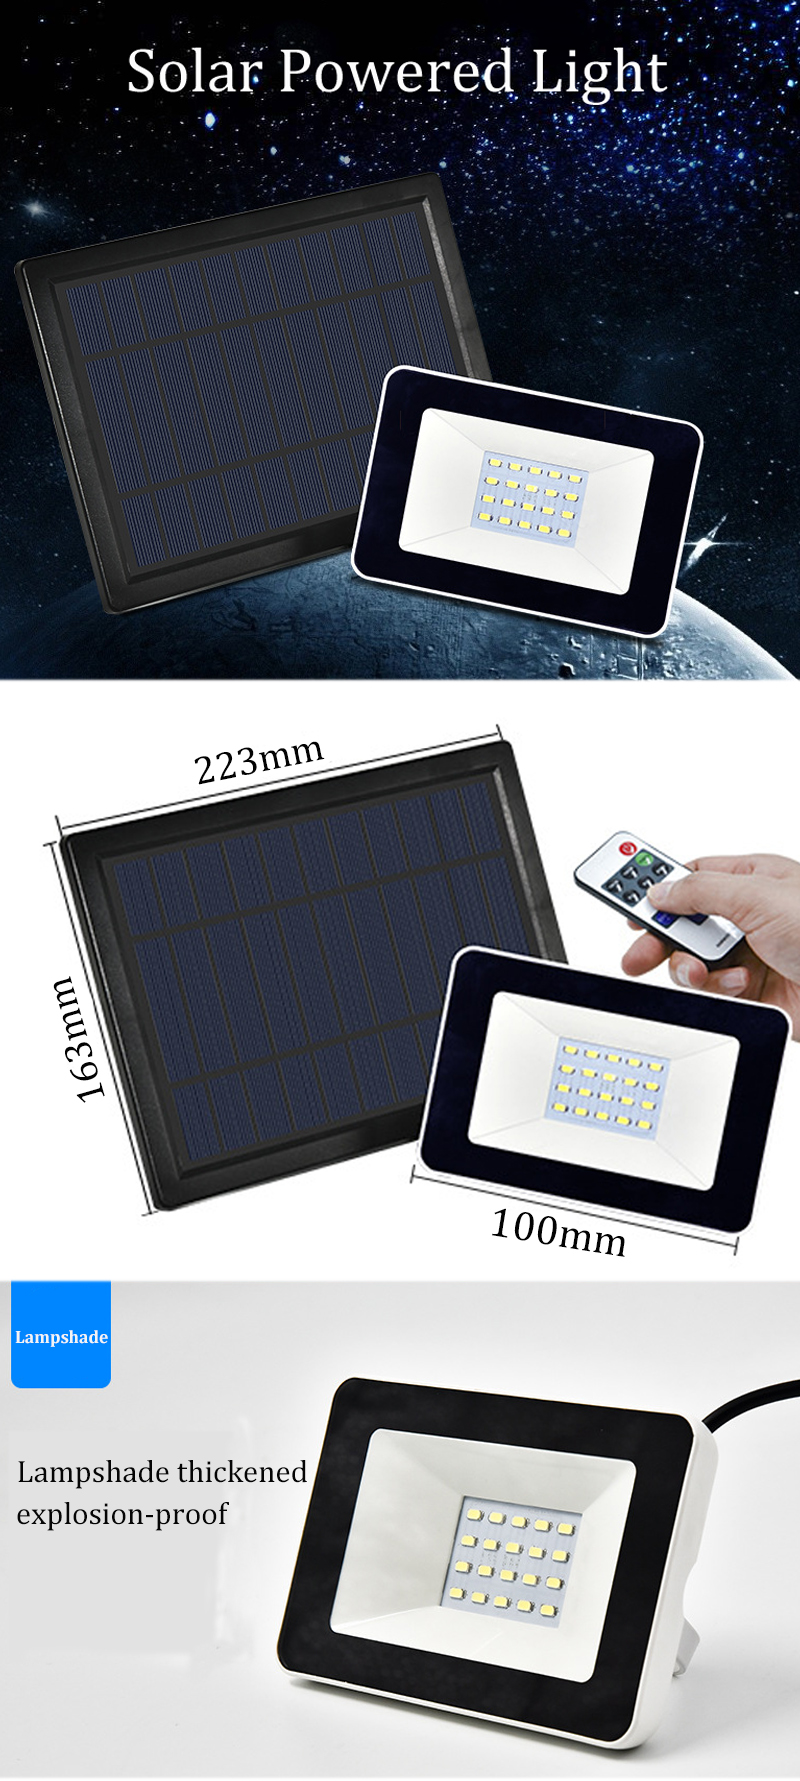 4W-20-LED-Solar-Powered-Light-Waterproof-Outdoor-Camping-Lamps-Emergency-Remote-Control-Lantern-1351438-1